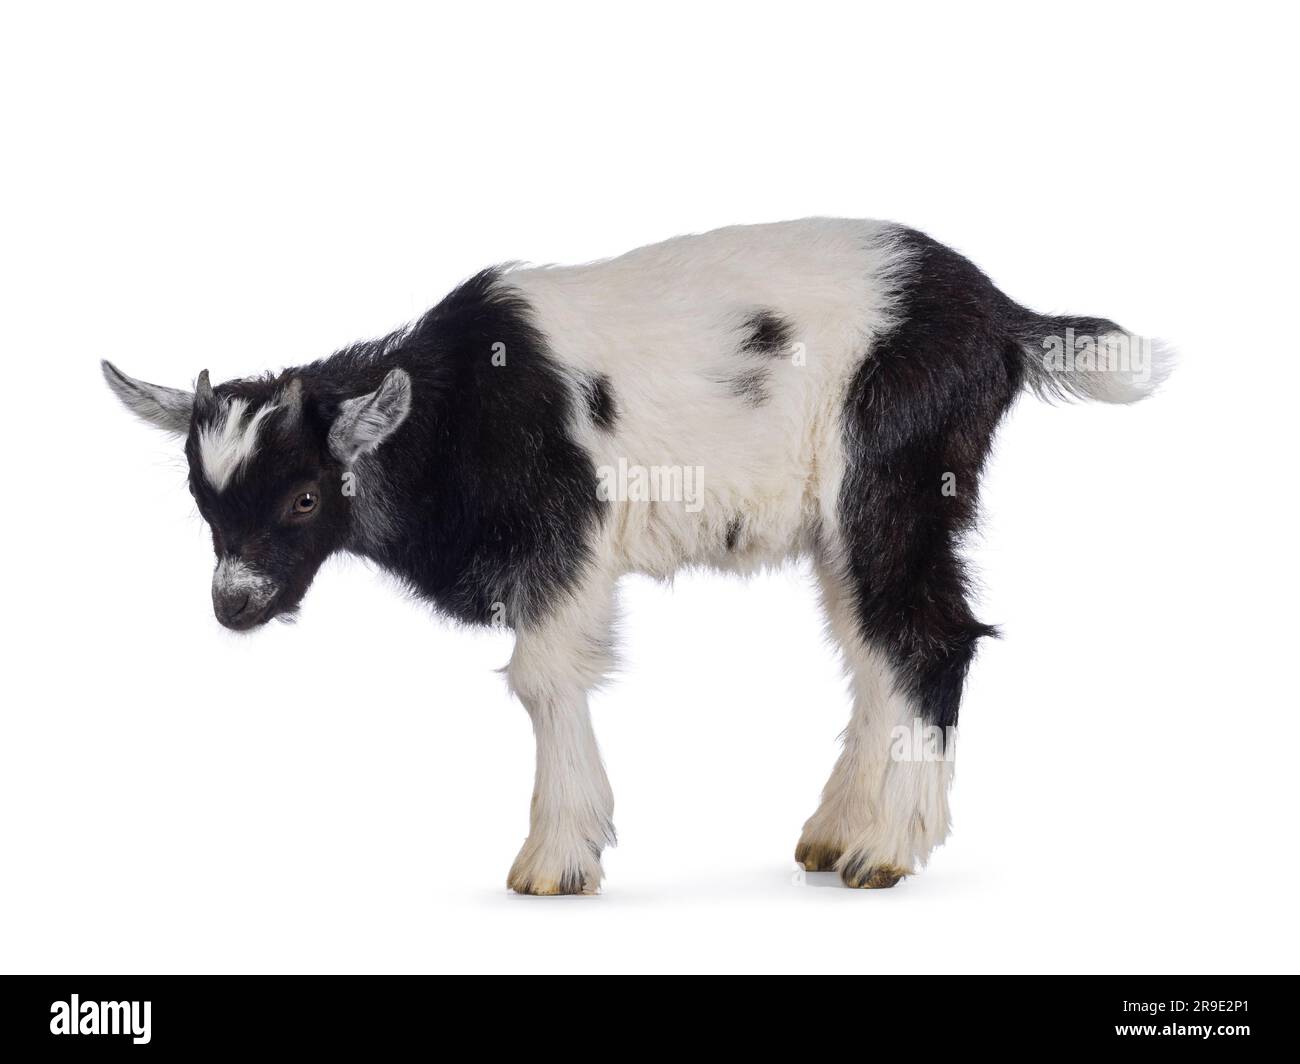 Adorable black and white baby goat, standing side ways. Looking downwards. Isolated on a white background. Stock Photo